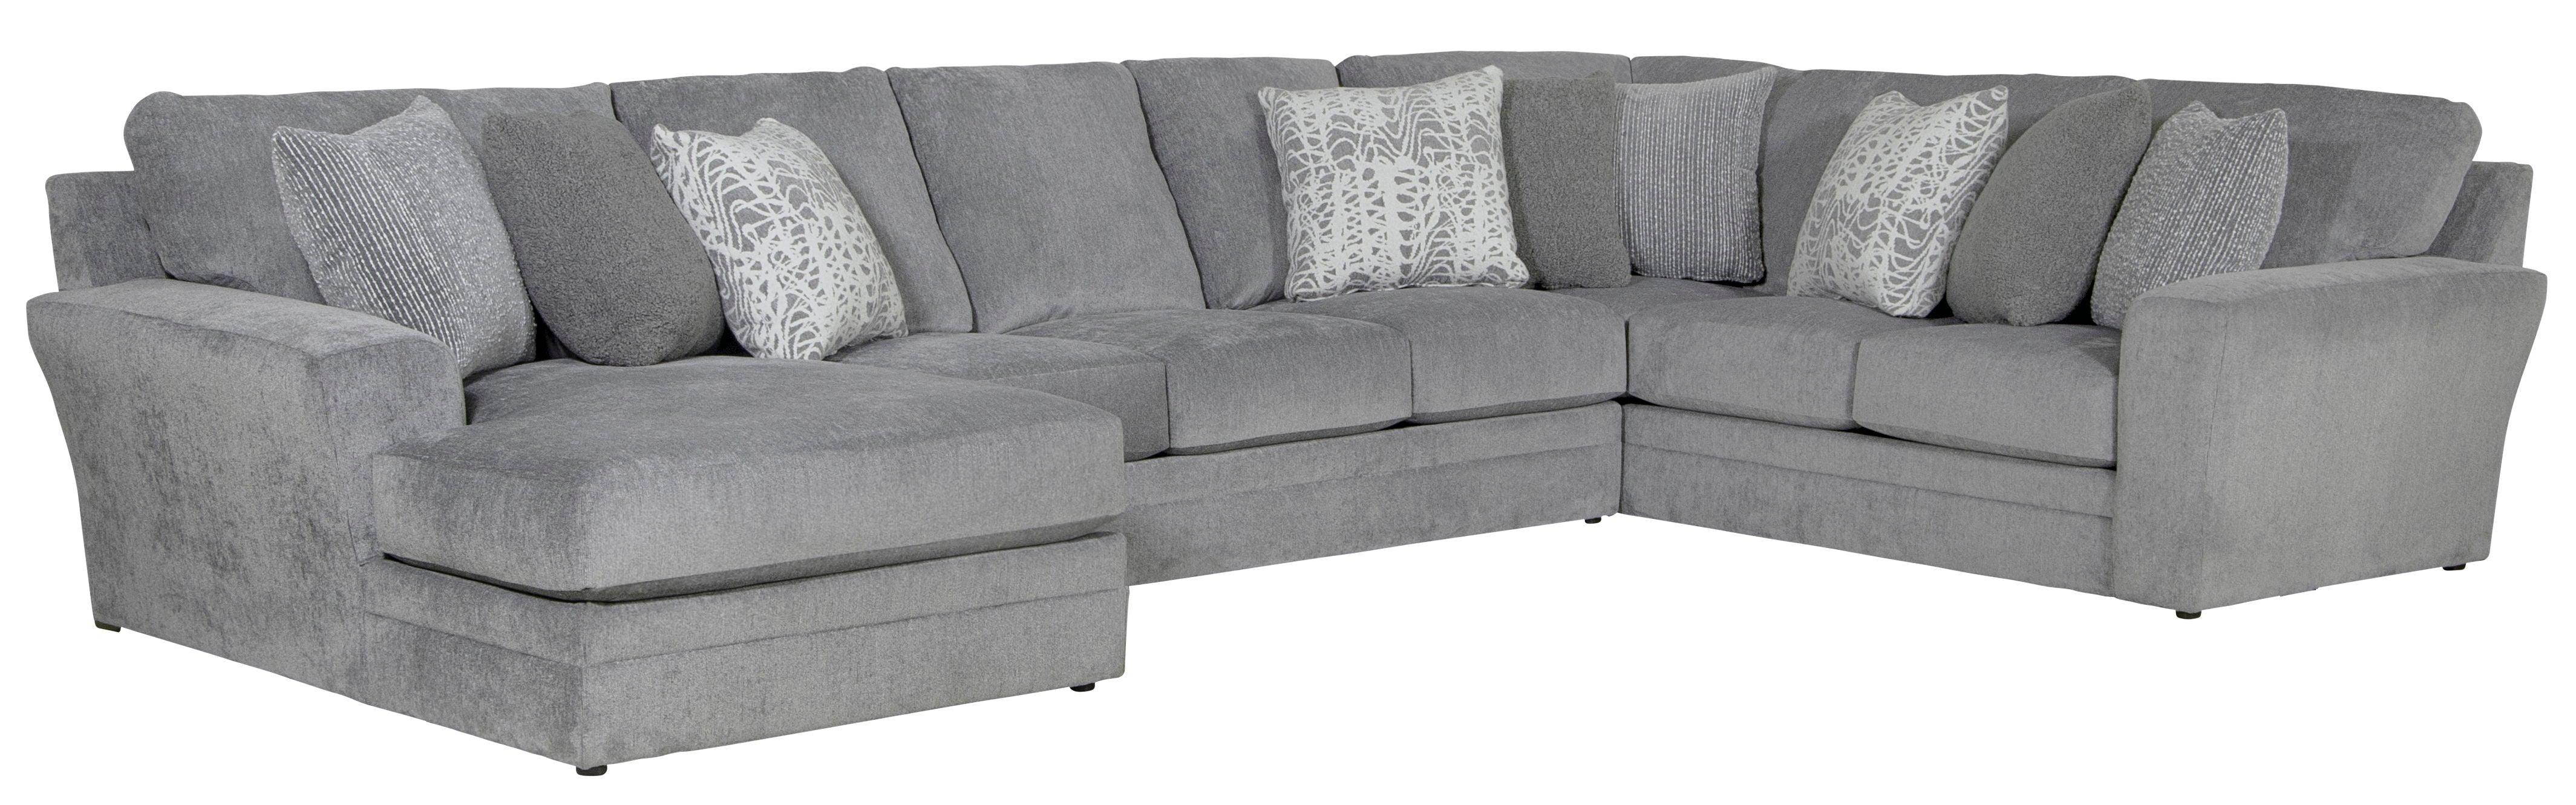 Jackson - Glacier - 3 Piece Sectional And 9 Included Accent Pillows - 5th Avenue Furniture